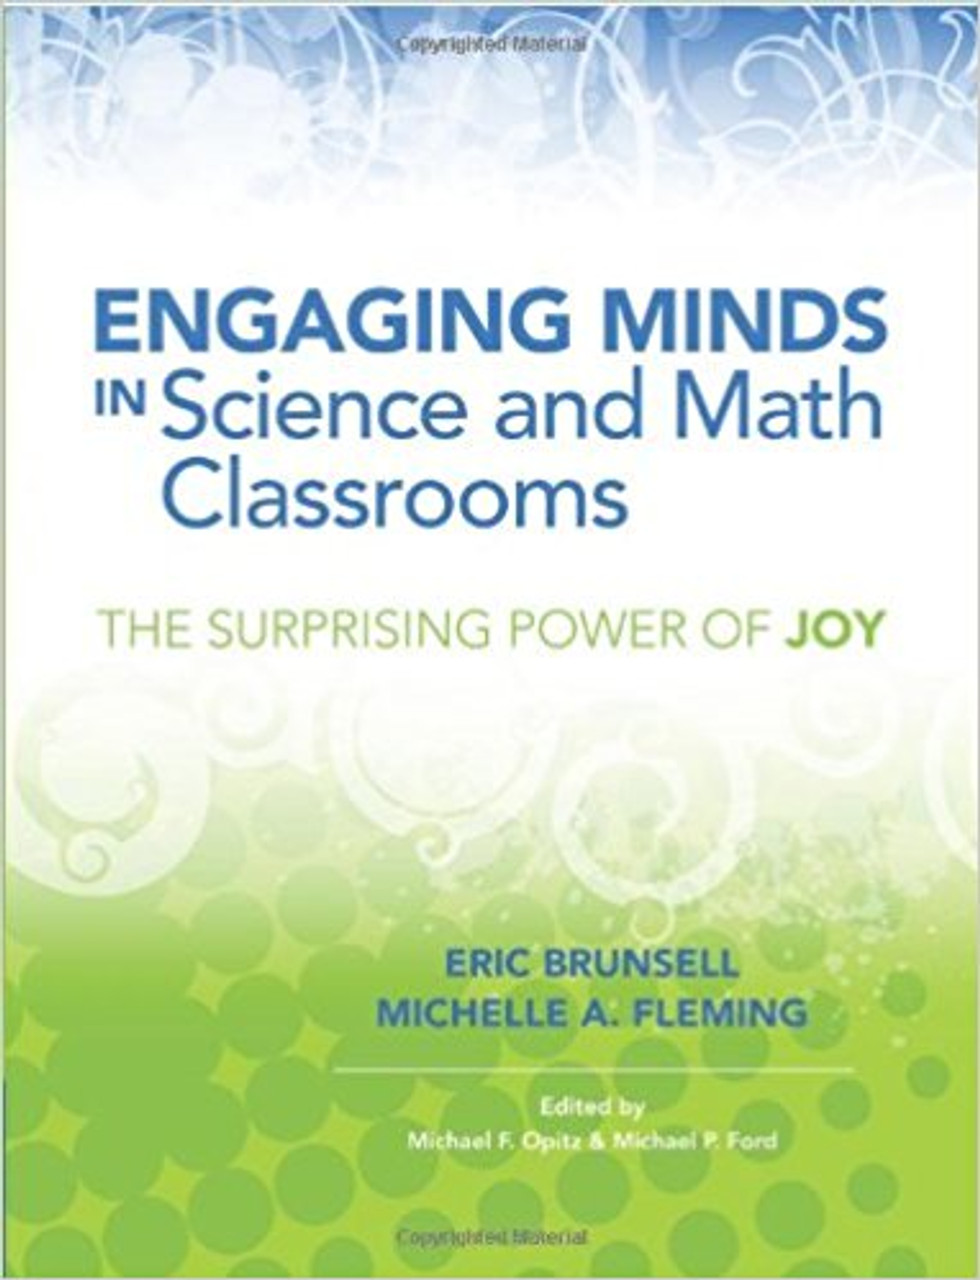 This book is brimming with ideas and activities that are aligned with standards and high expectations to engage and motivate all learners in STEM classrooms.